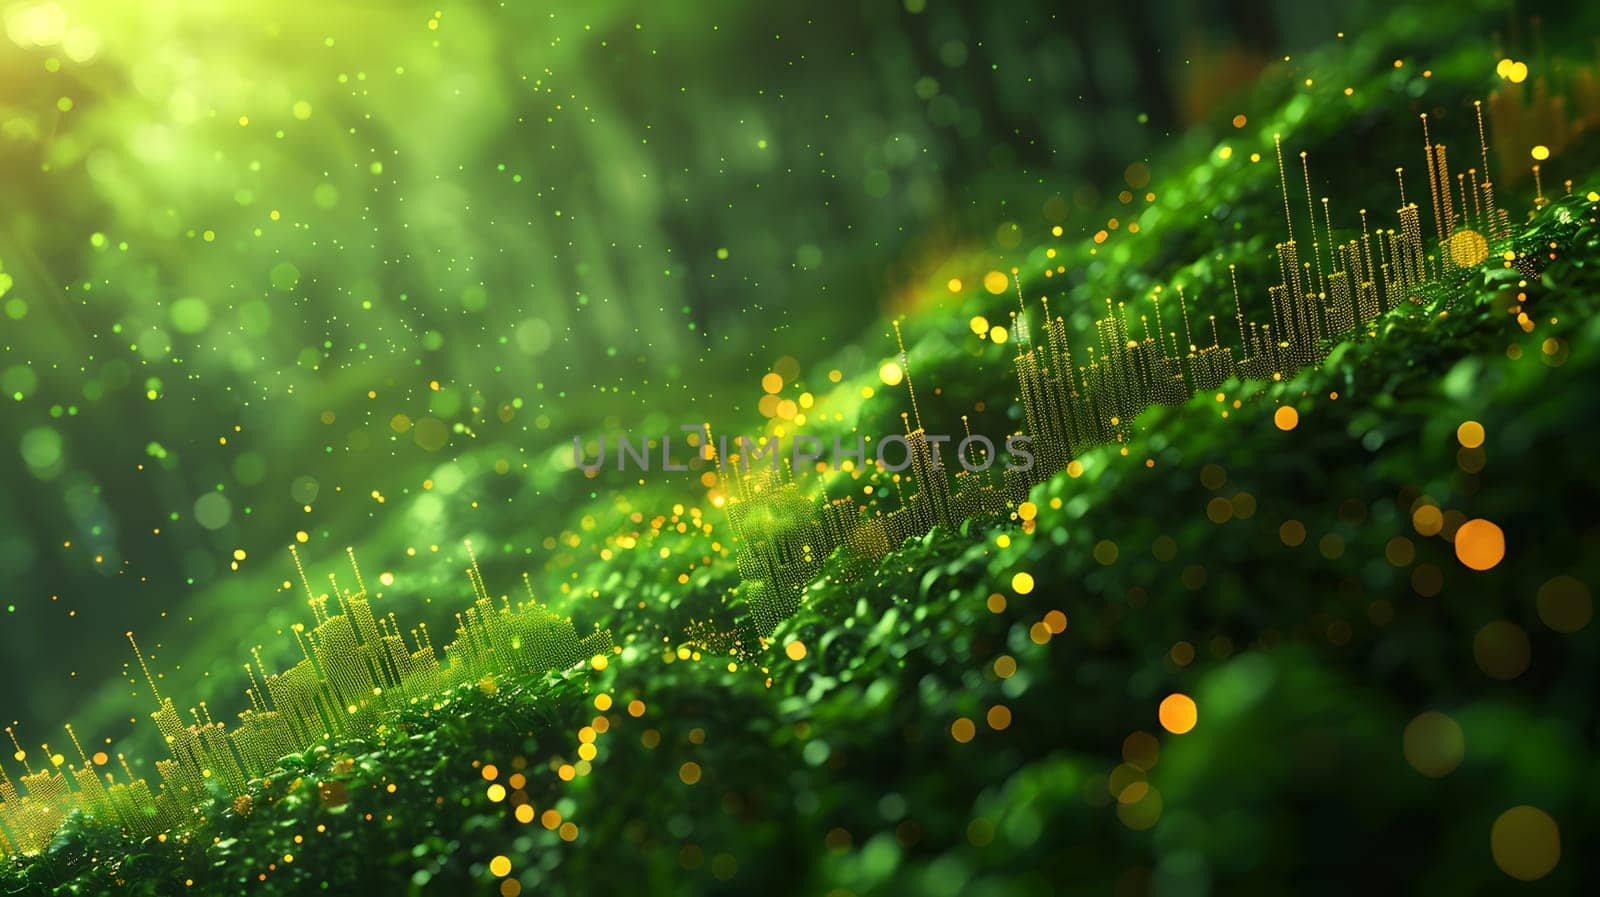 A close up of a terrestrial plant with vibrant green leaves and golden sparkles emanating from it, enhancing the natural landscape with a touch of magic